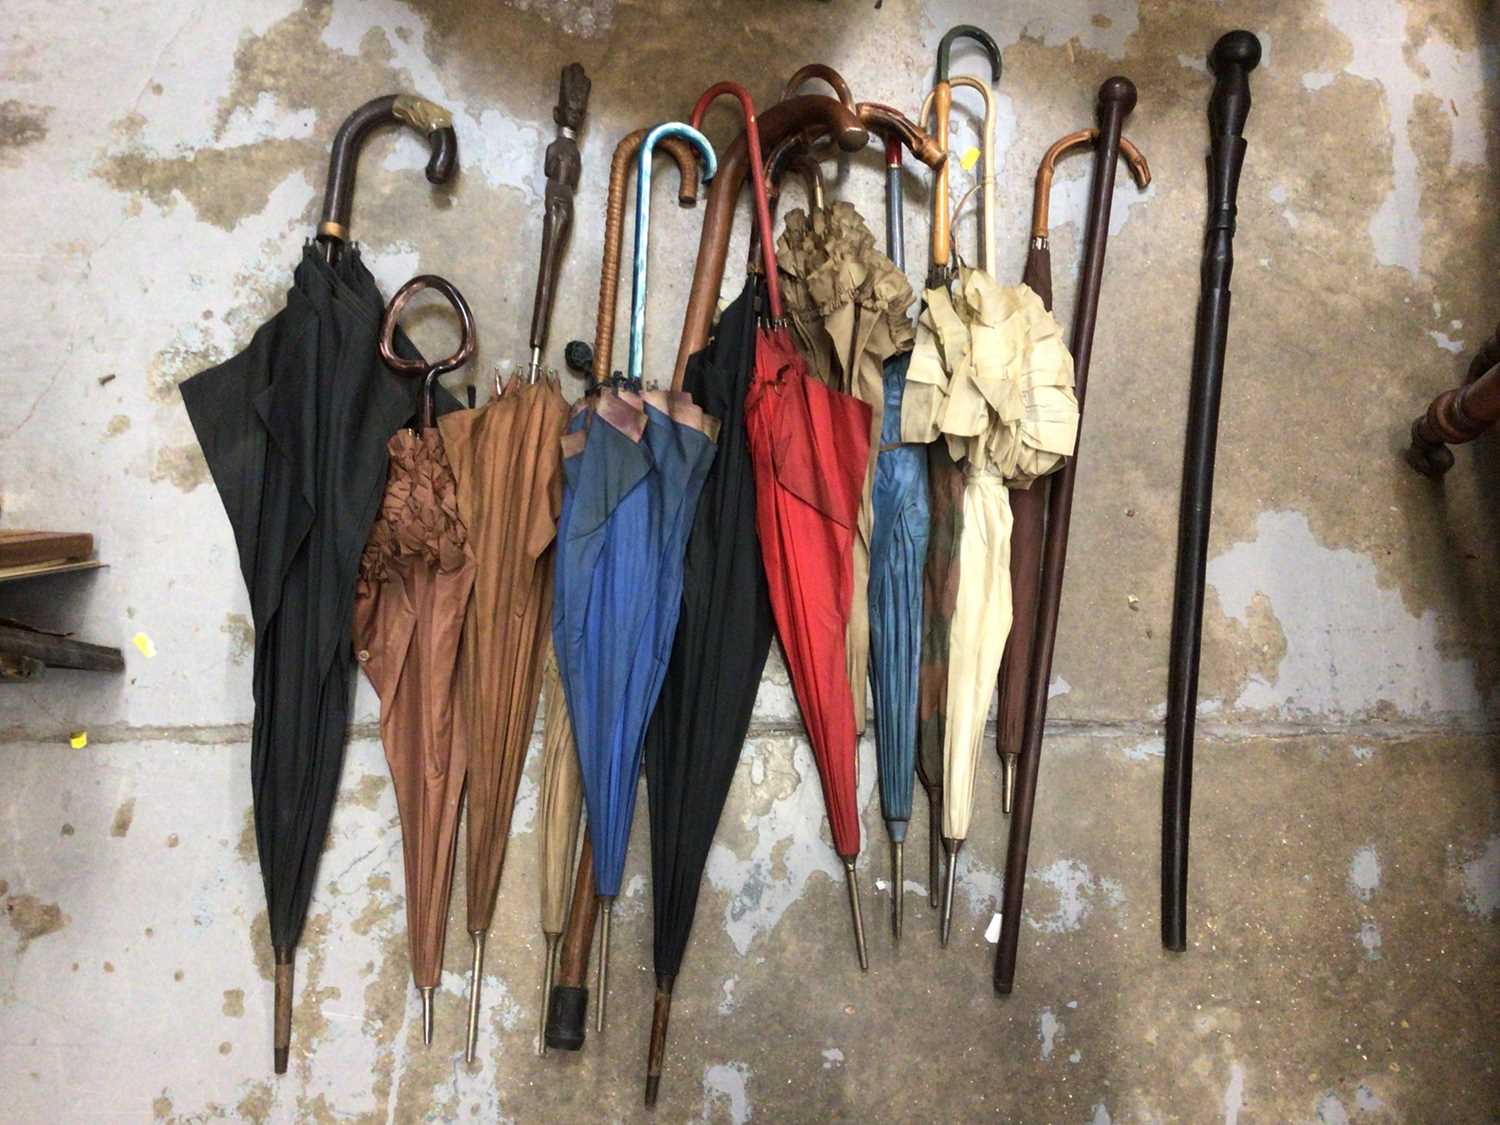 Lot 32 - Collection of various walking sticks and umbrellas